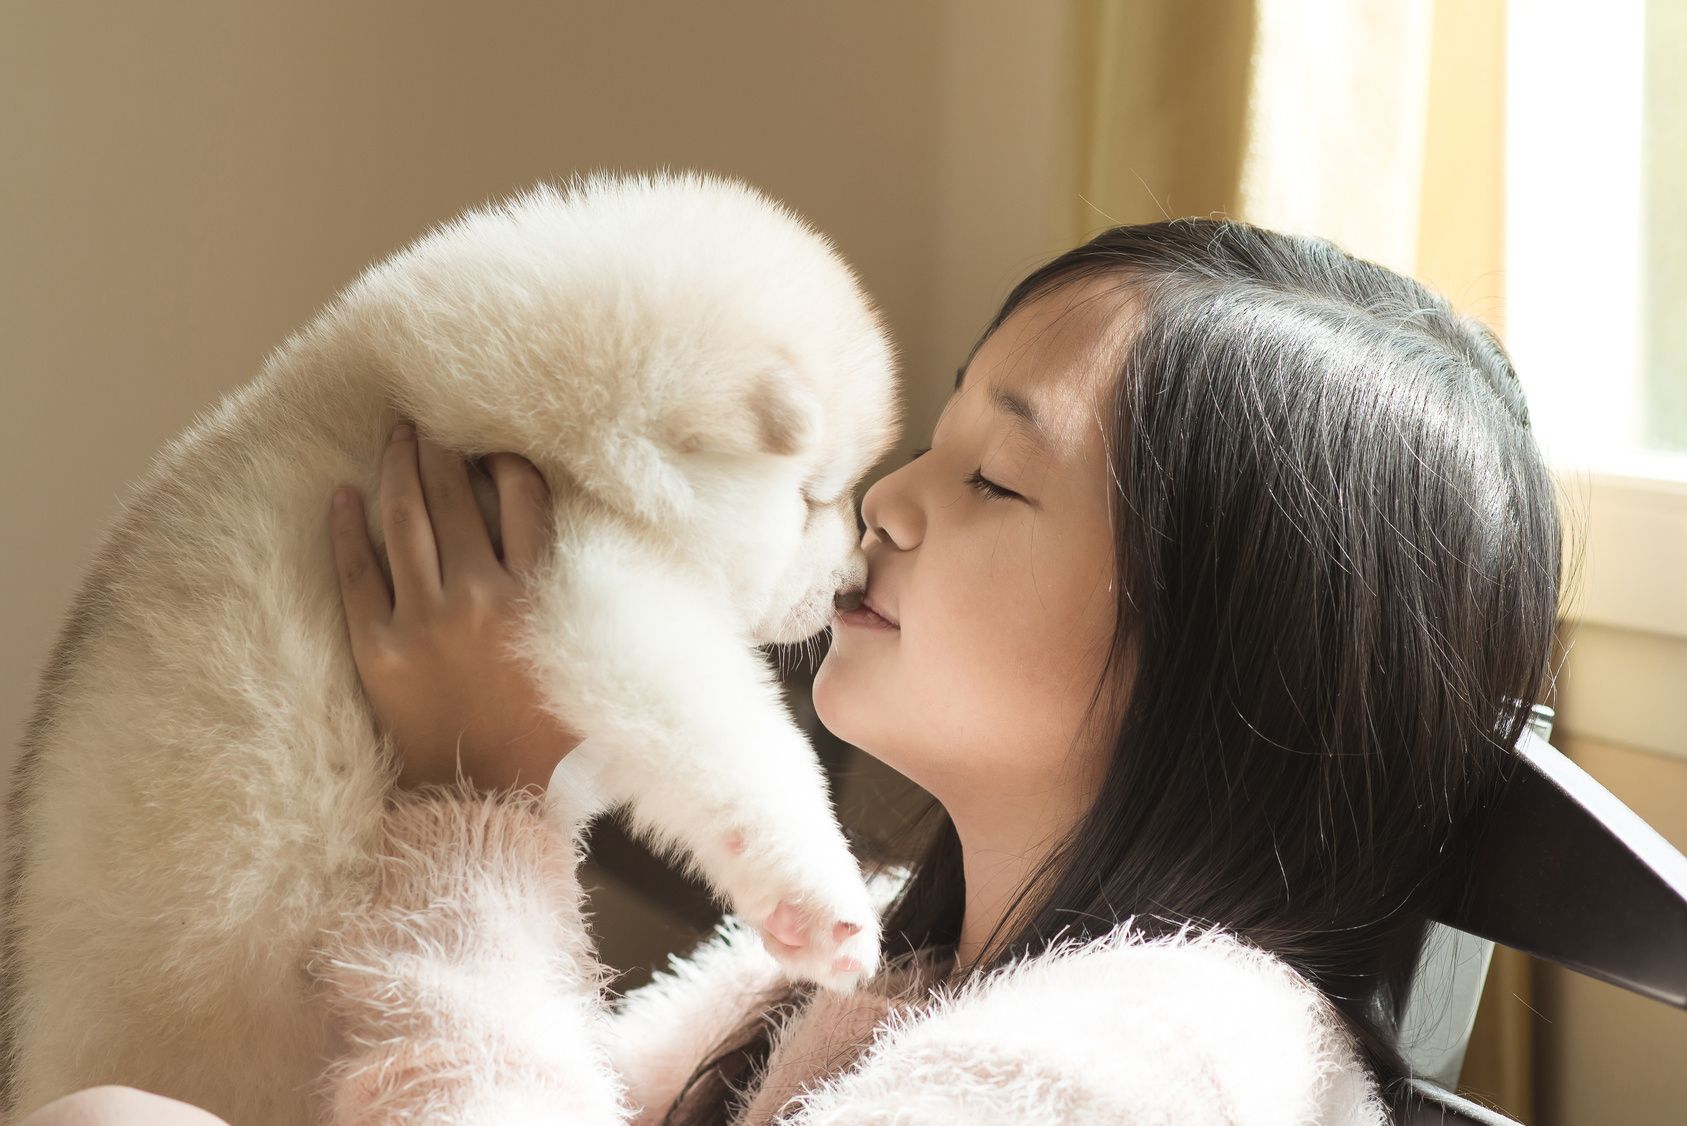 Little asian girl kissing a siberian husky puppy at the window,vintage filter